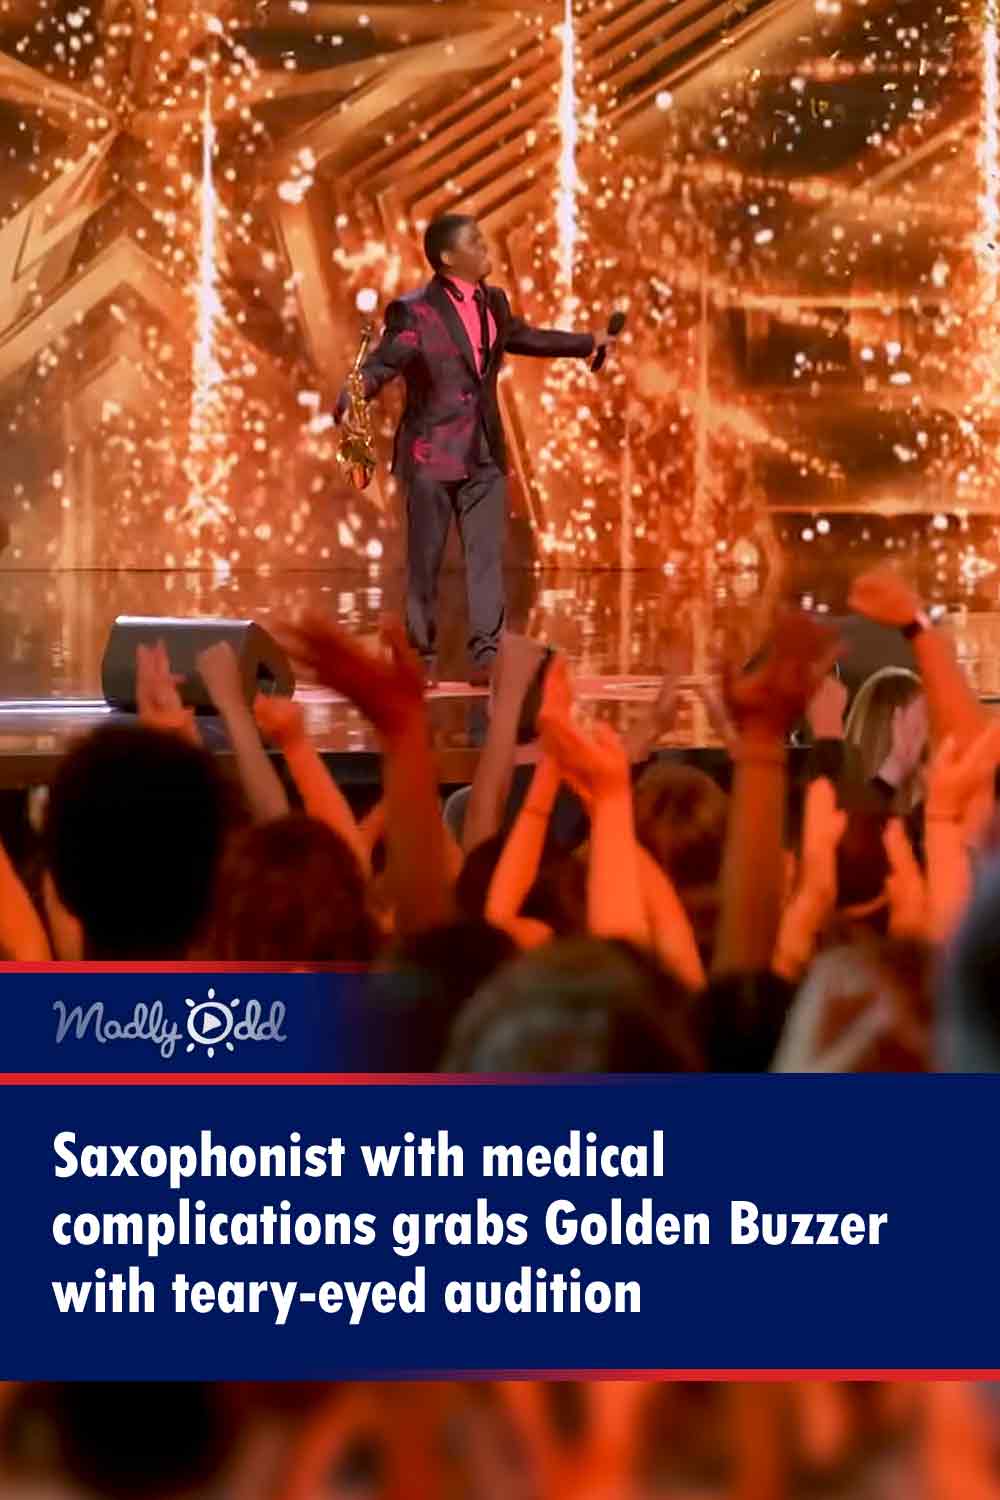 Saxophonist with medical complications grabs Golden Buzzer with teary-eyed audition